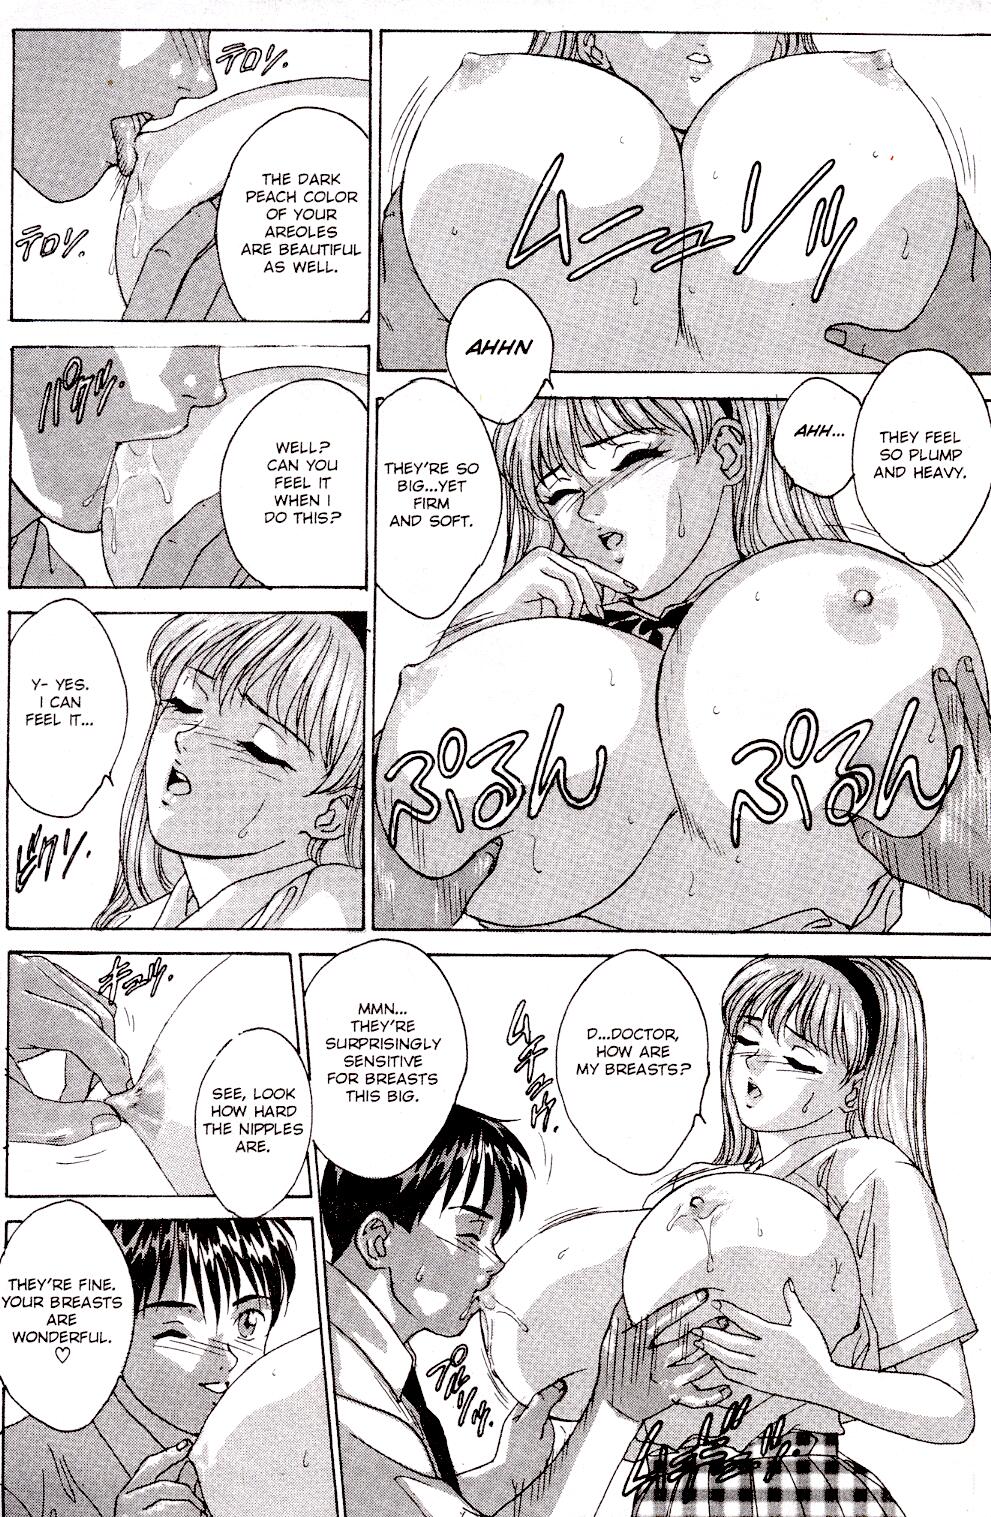 A-G Super Erotic Anthology Issue 9 [english] page 15 full